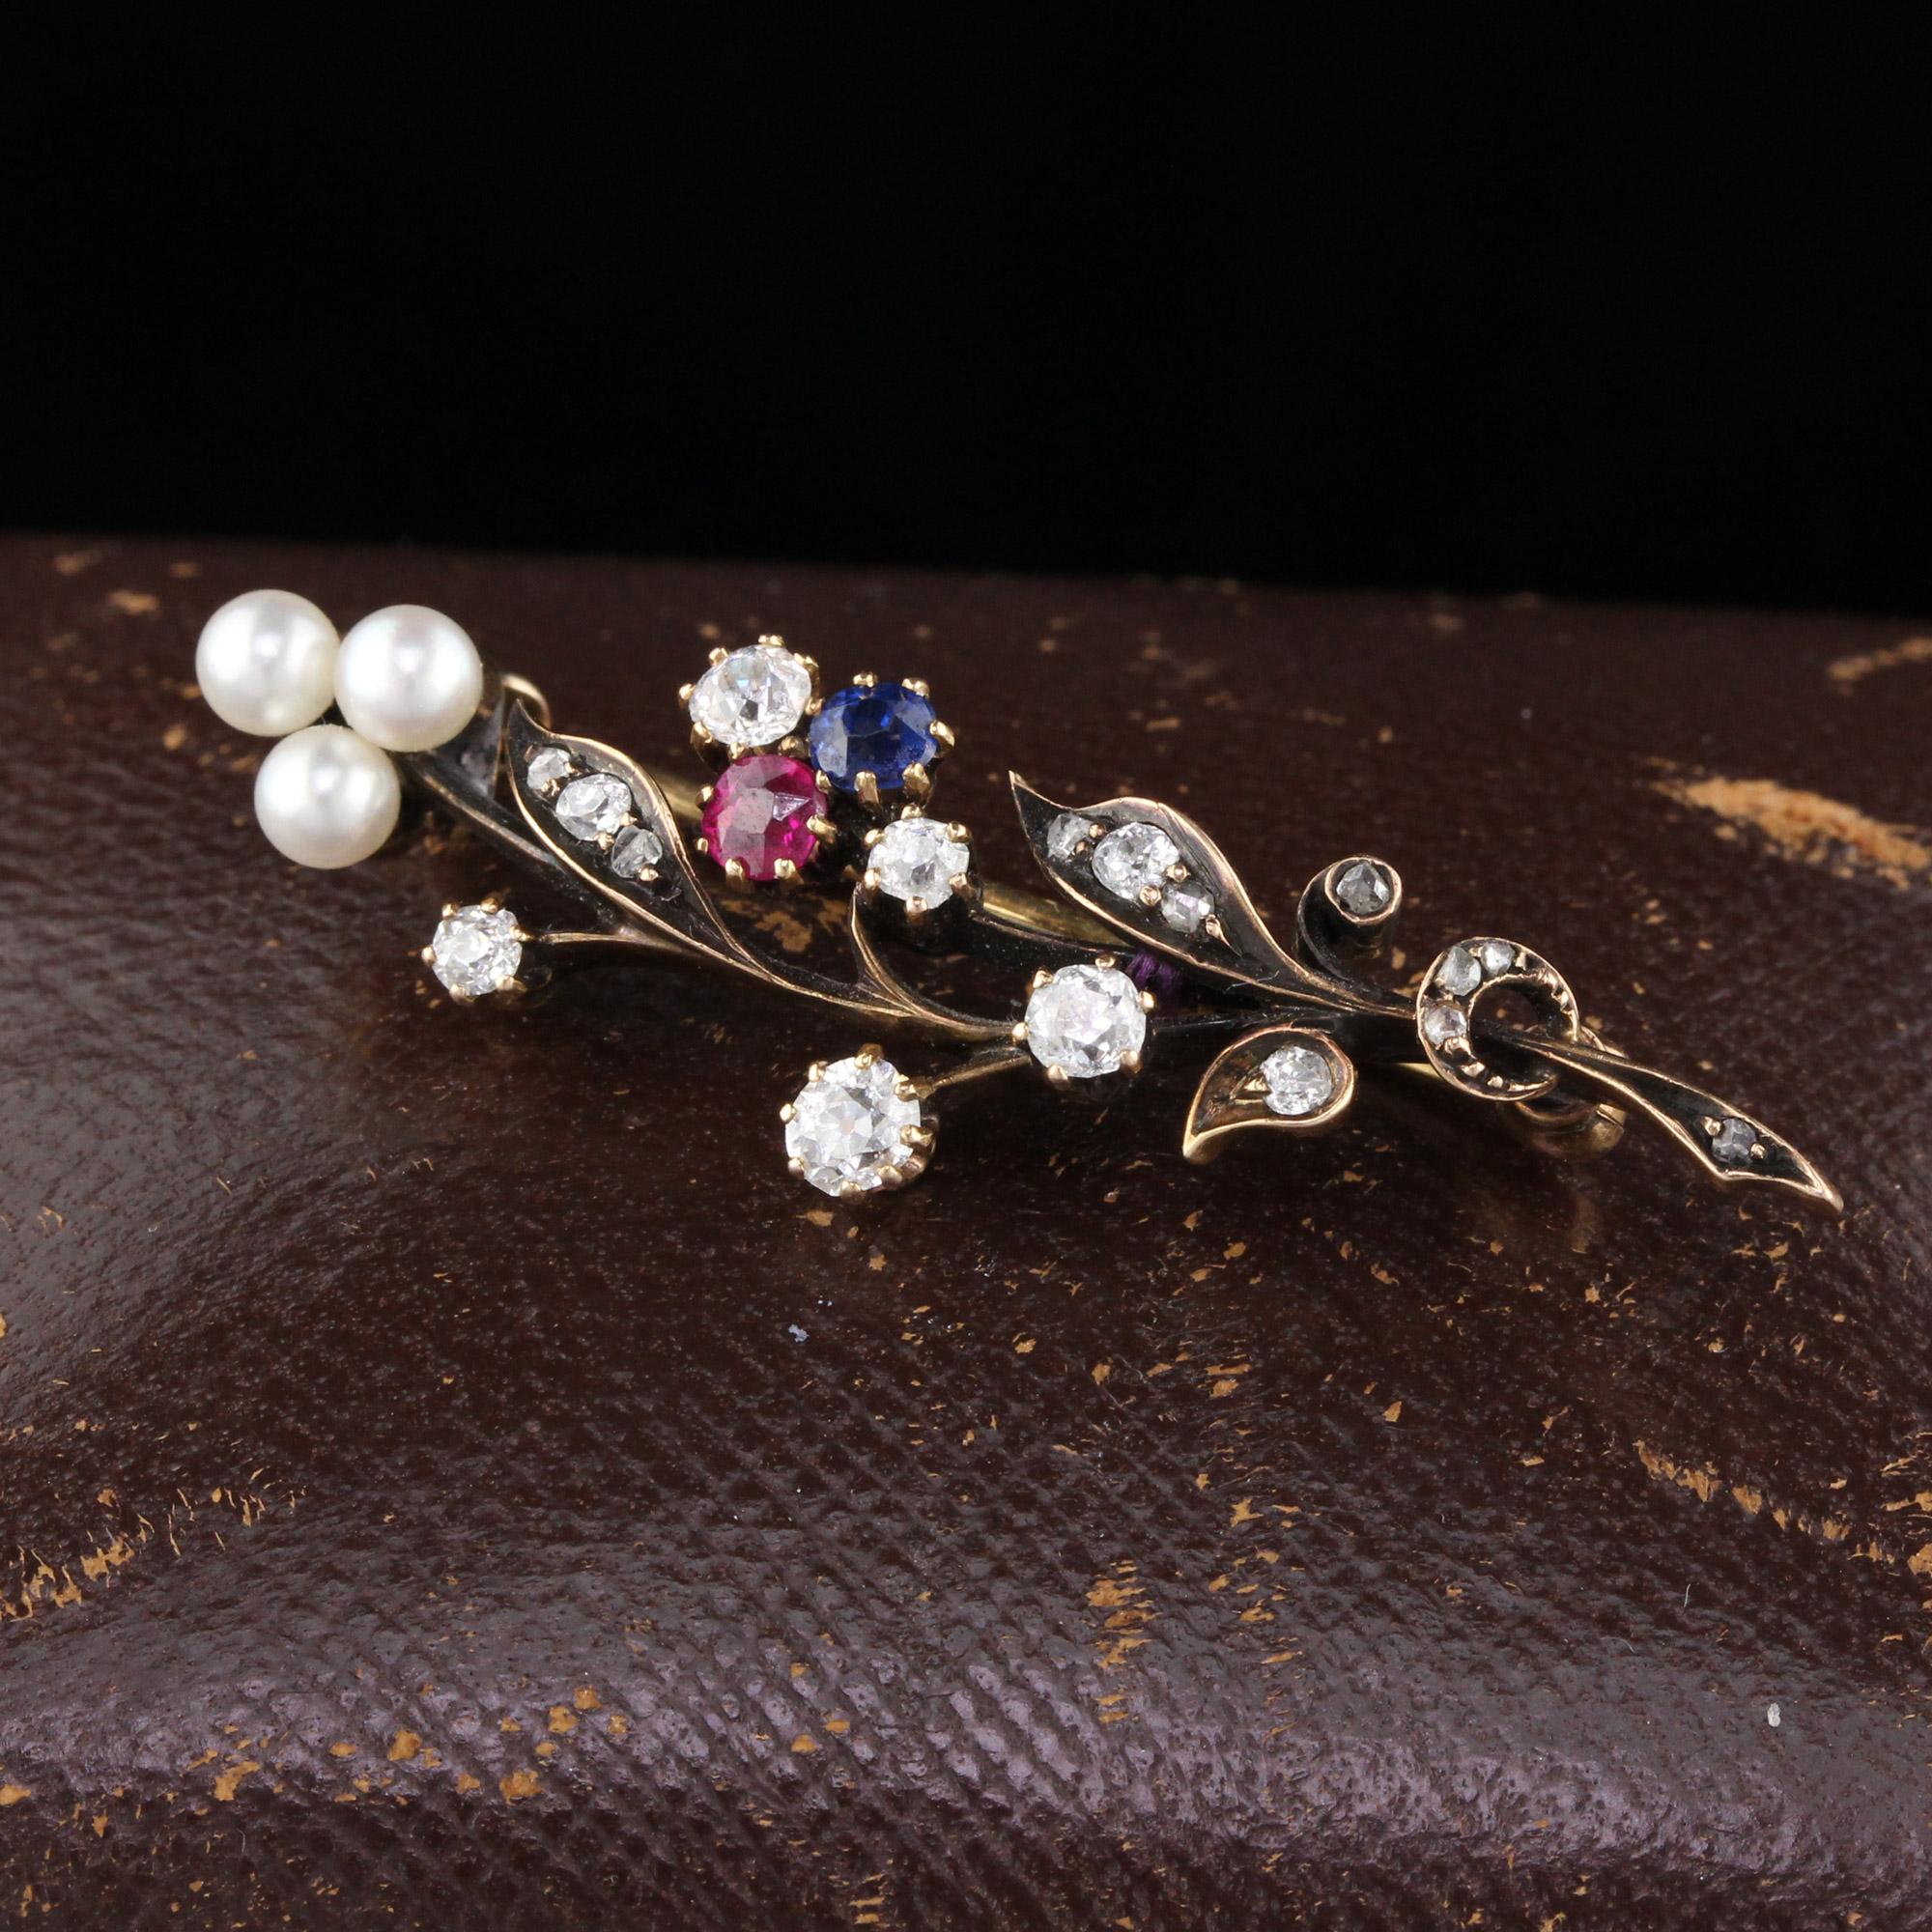 Stunning Victorian floral bouquet brooch with old cut diamonds, pearls, sapphire & ruby.

Metal: Yellow Gold, Silver Top

Weight: 5.9 Grams 

Measurements: 13 x 44.2 mm